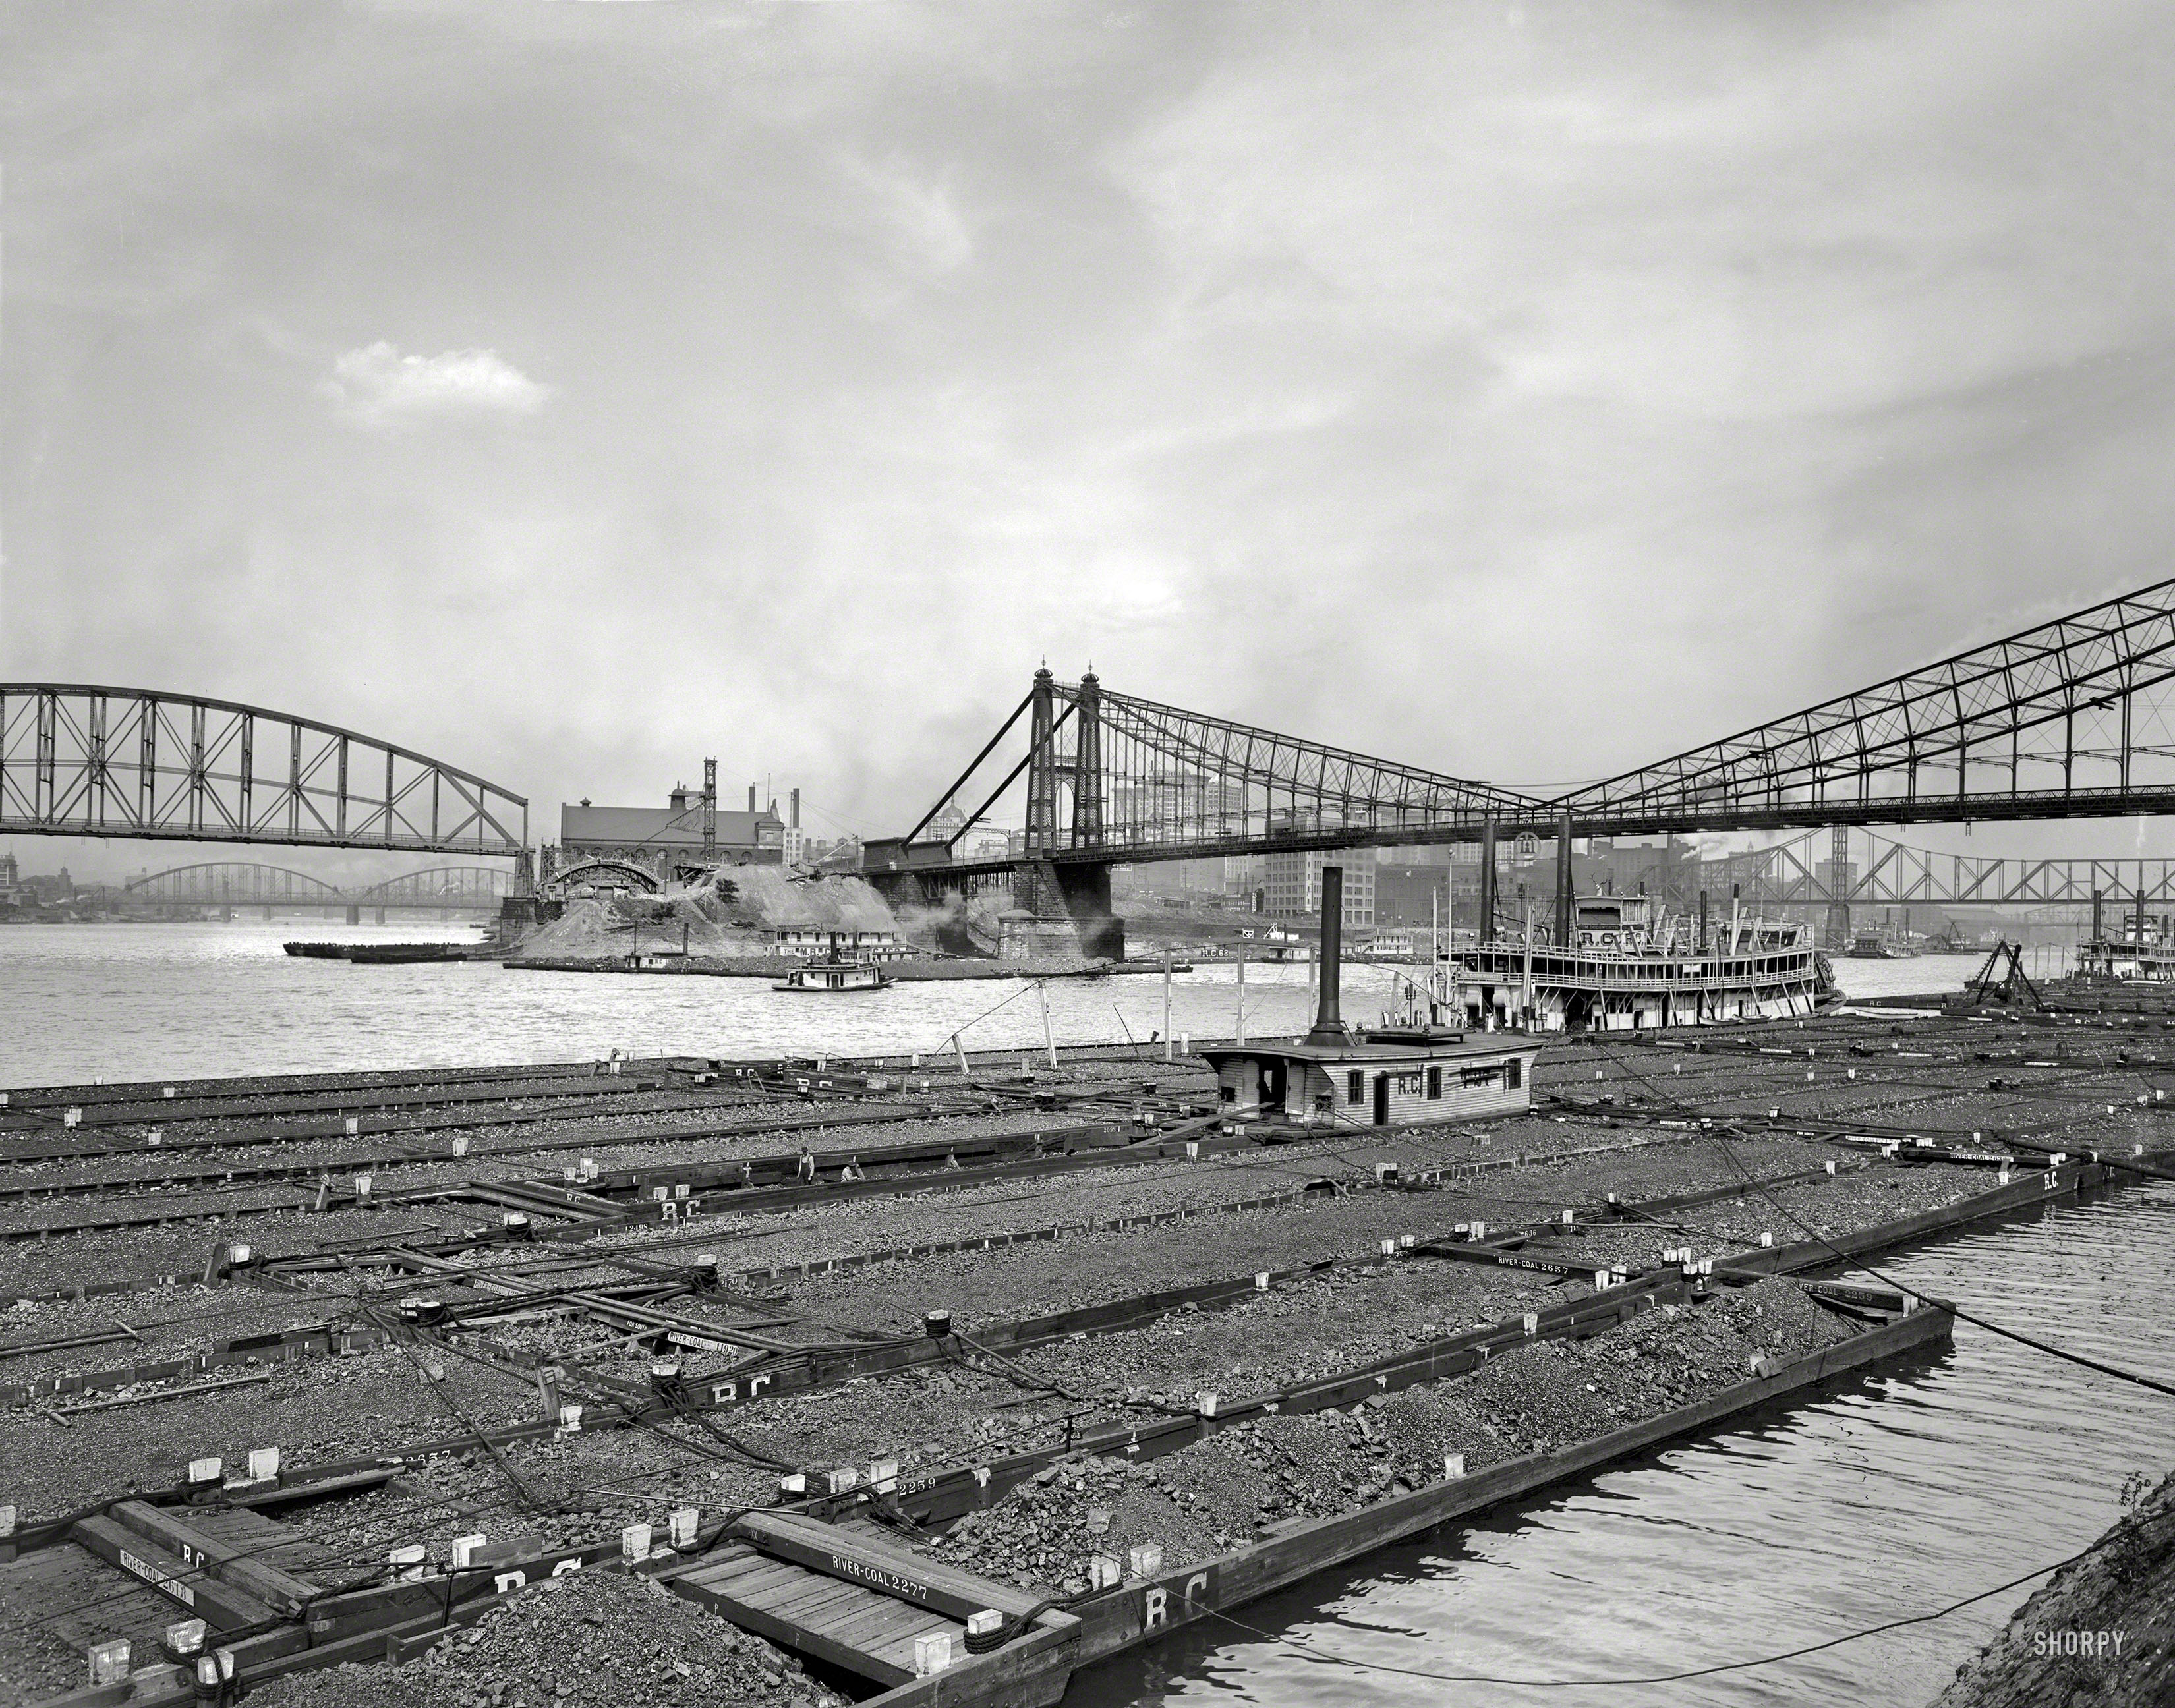 Circa 1910. "Coal barges at confluence of Allegheny and Monongahela rivers at Pittsburgh, Pennsylvania." 8x10 inch  glass negative. View full size.